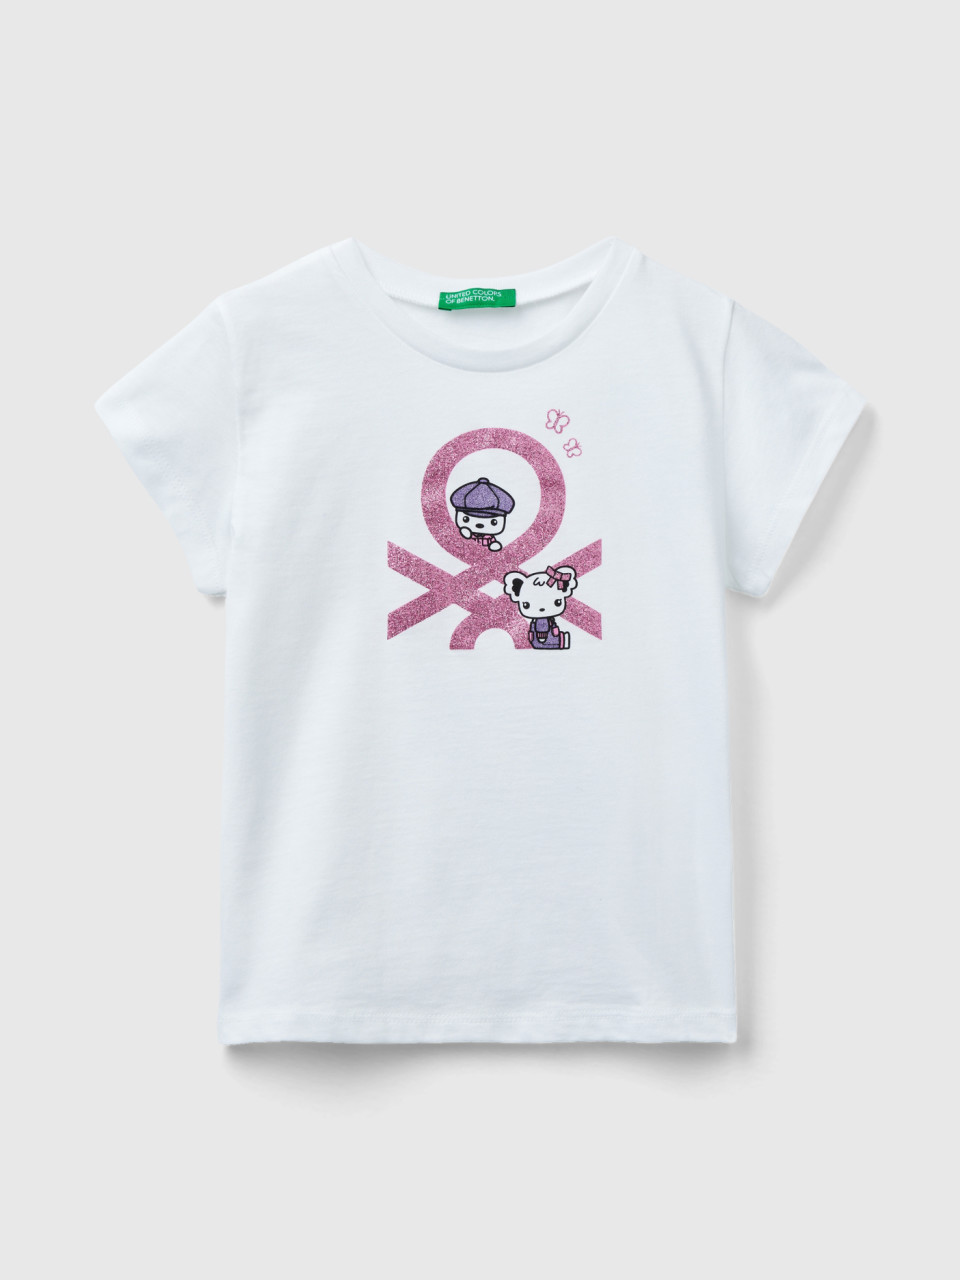 Benetton, T-shirt With Print In Organic Cotton, White, Kids